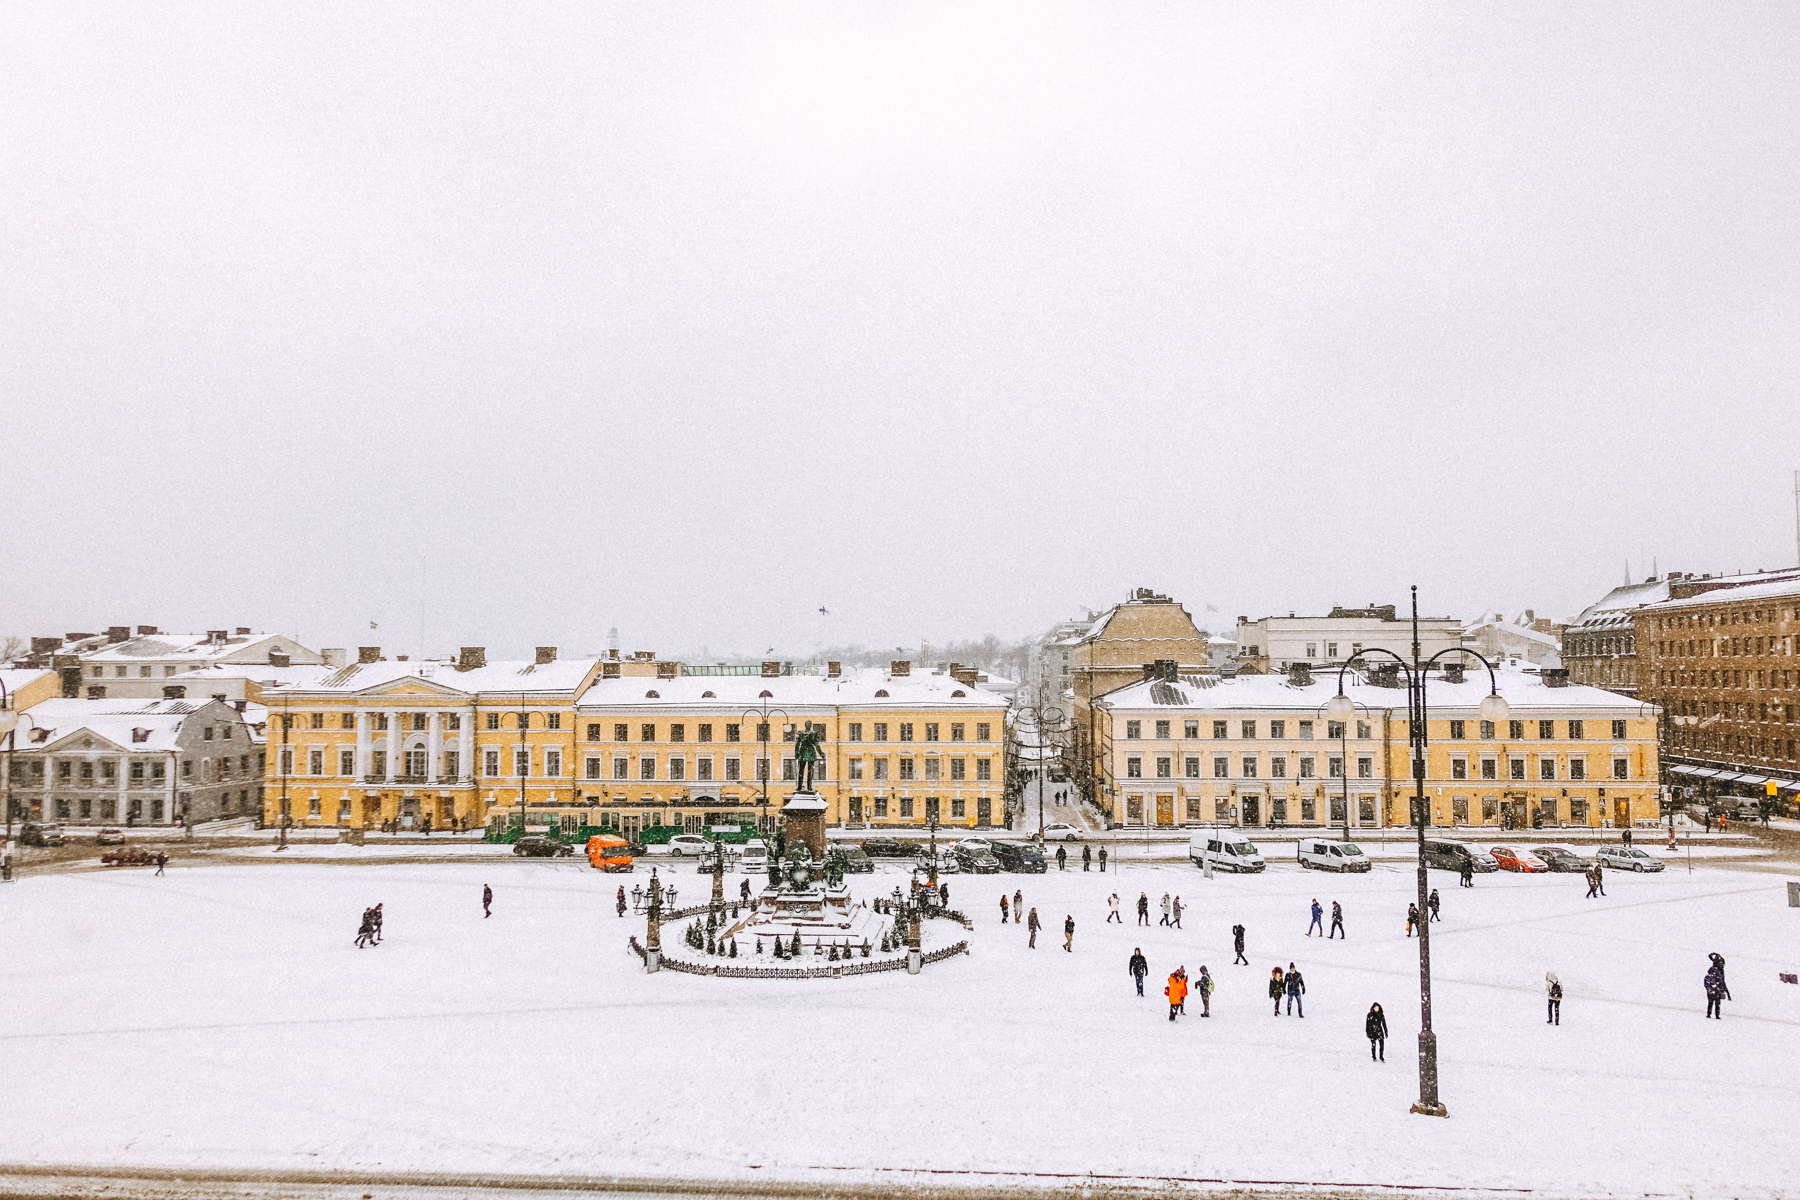 Alyssa Campanella of The A List blog shares her Helsinki City Guide and visits Helsinki Cathedral